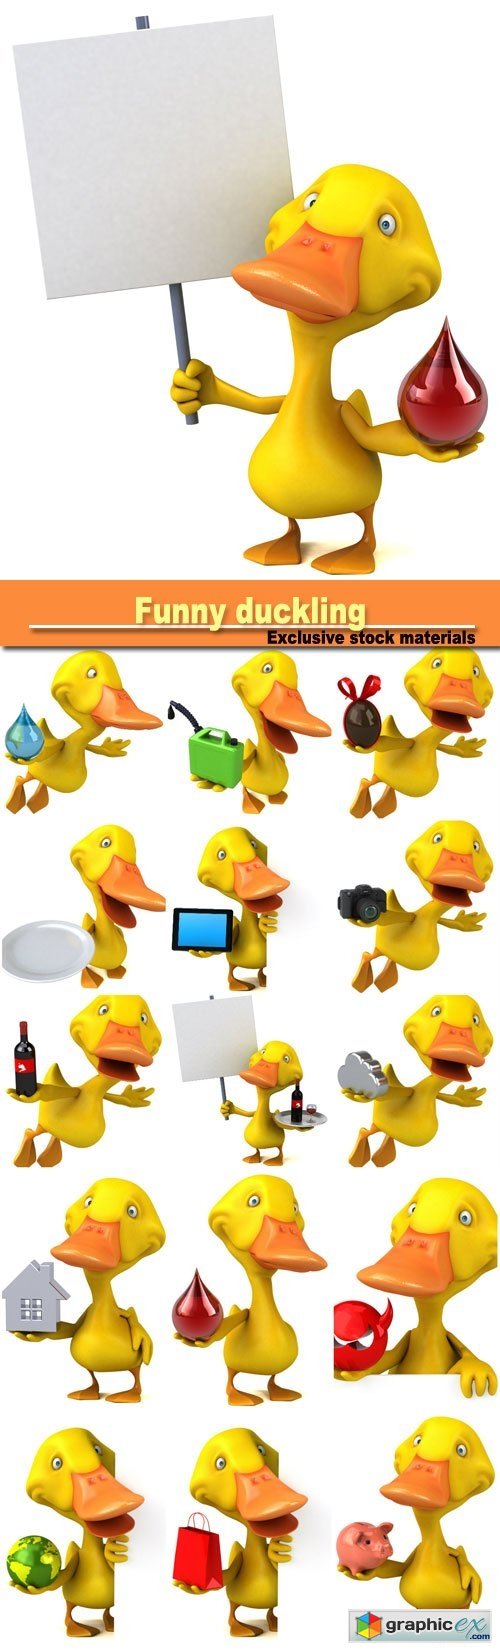 Funny duckling with different icons